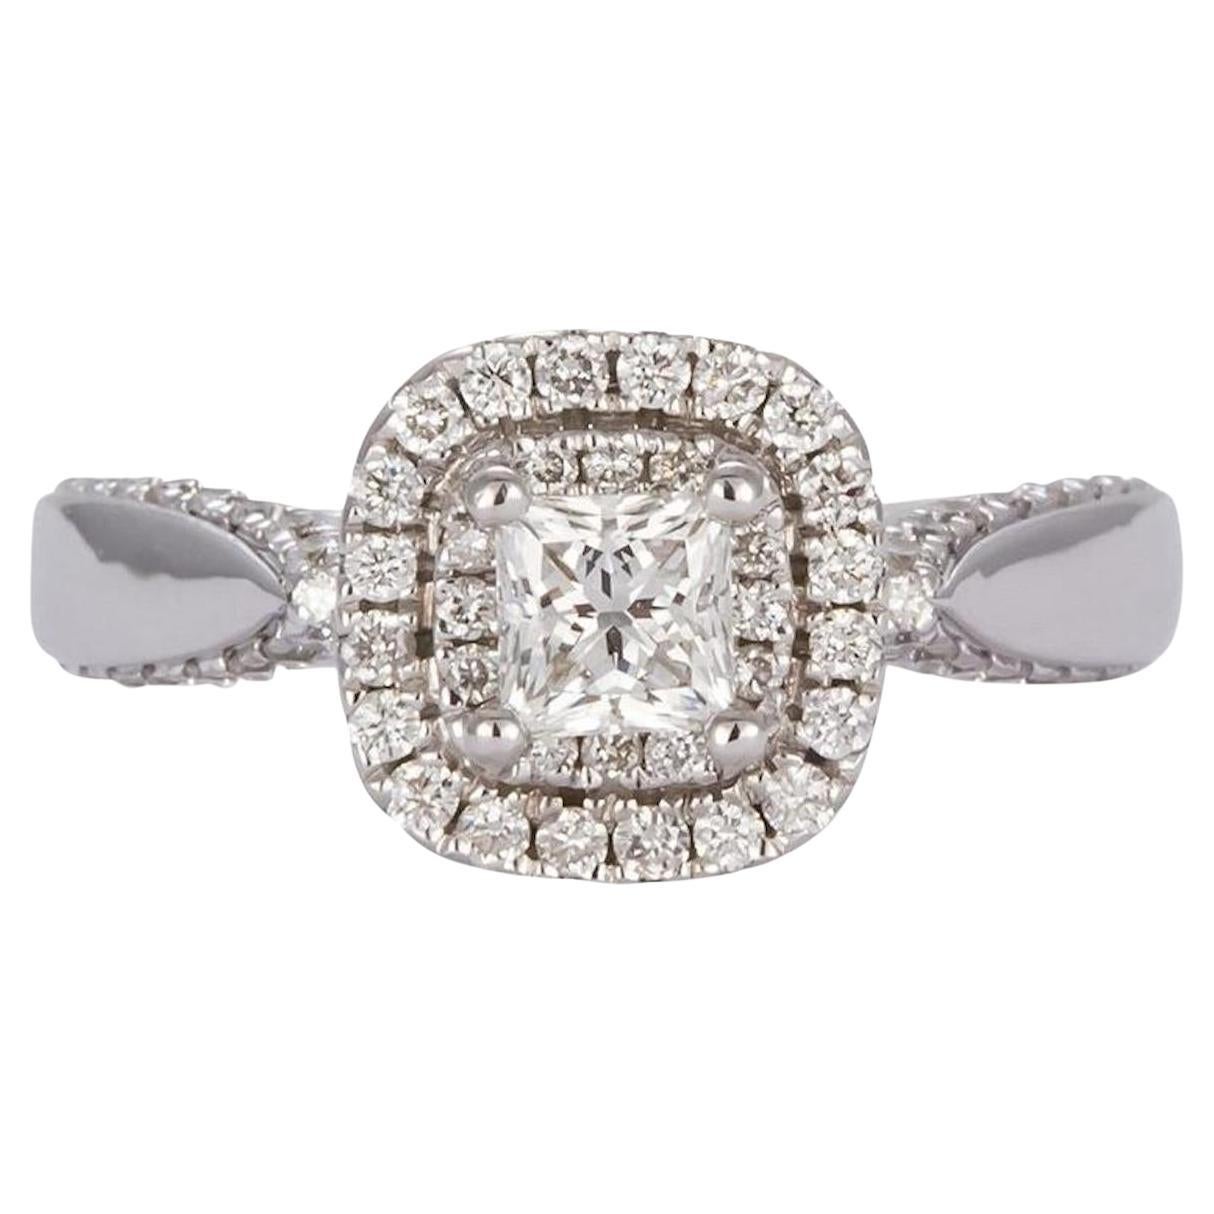 Vera Wang Love Collection 0.80 tcwt Princess Diamond Double Frame Ring